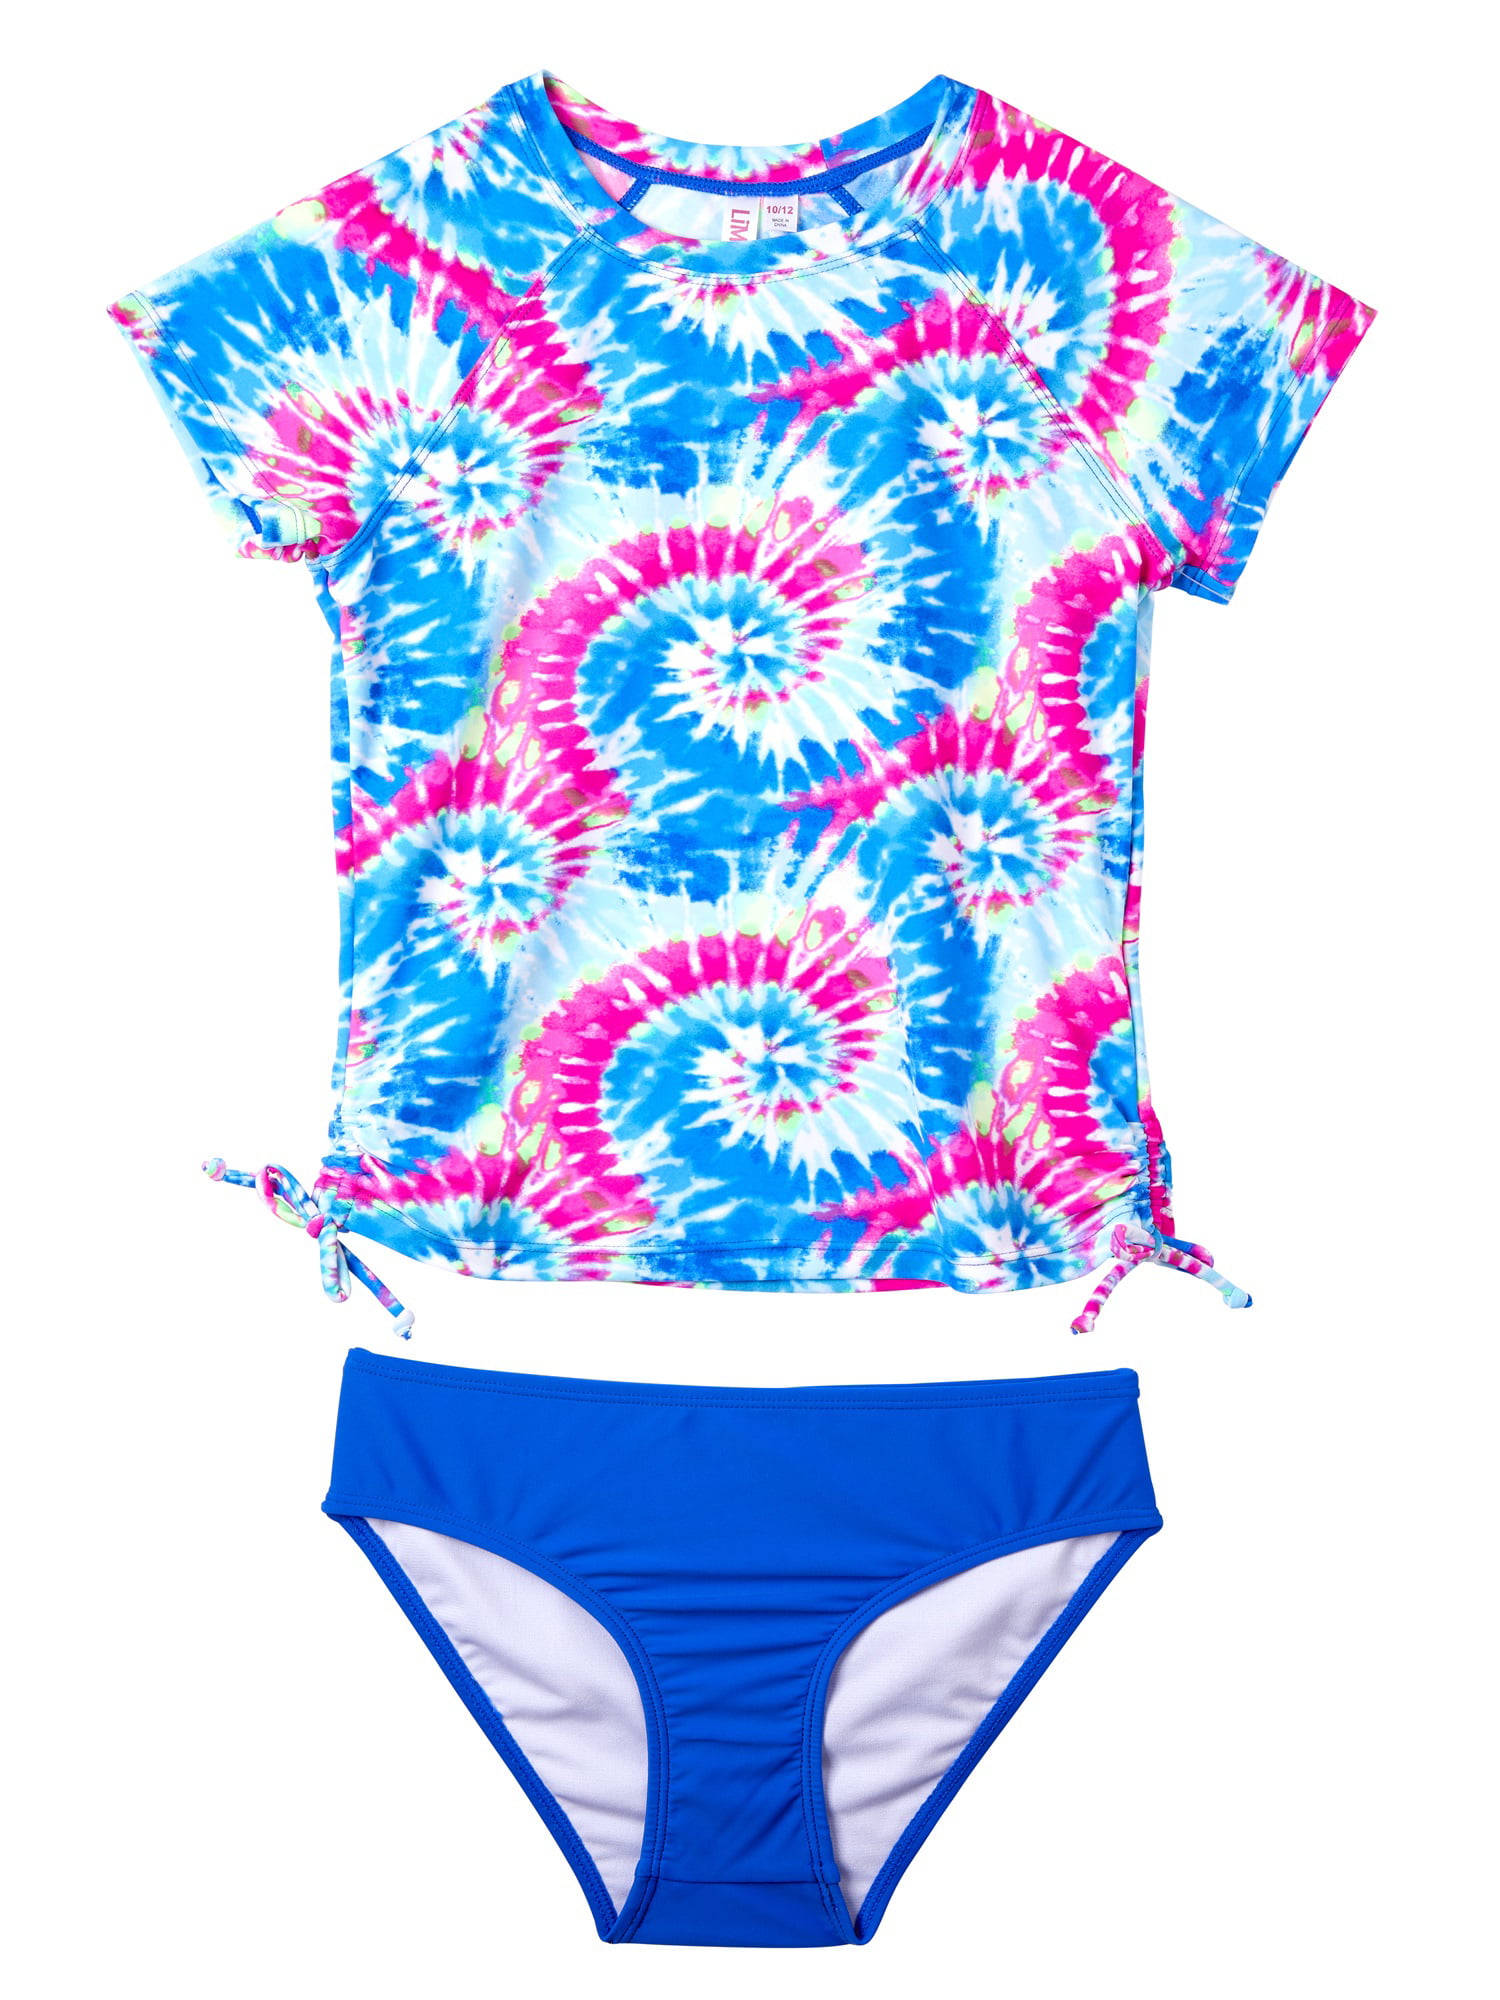 Limited Too Girls Long Sleeve One Piece Rash Guard Swimsuit with Front Zipper